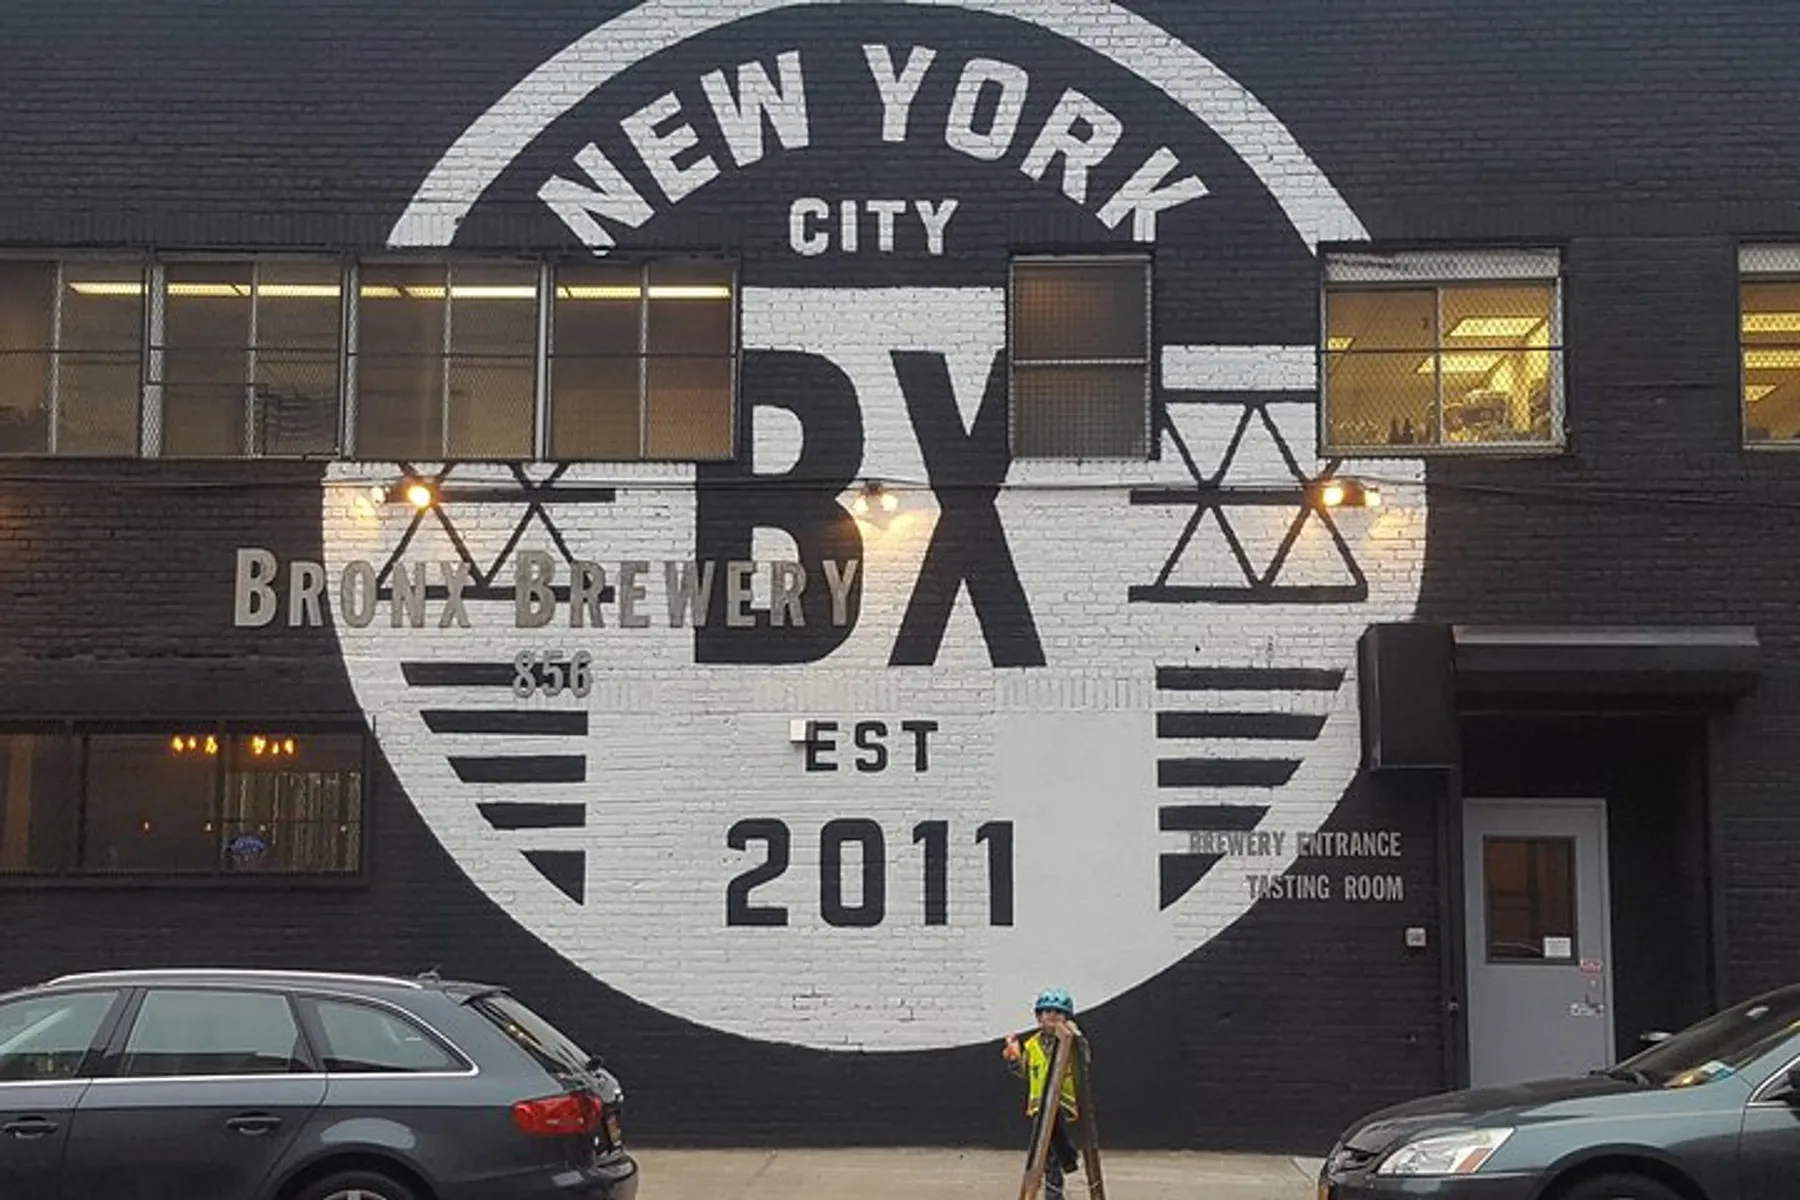 The image shows the exterior of a building painted black with a large white circular logo that reads New York City BX Bronx Brewery EST 2011, indicating the establishment is a brewery in the Bronx, New York City, established in 2011, with a person wearing a helmet standing in front of it.